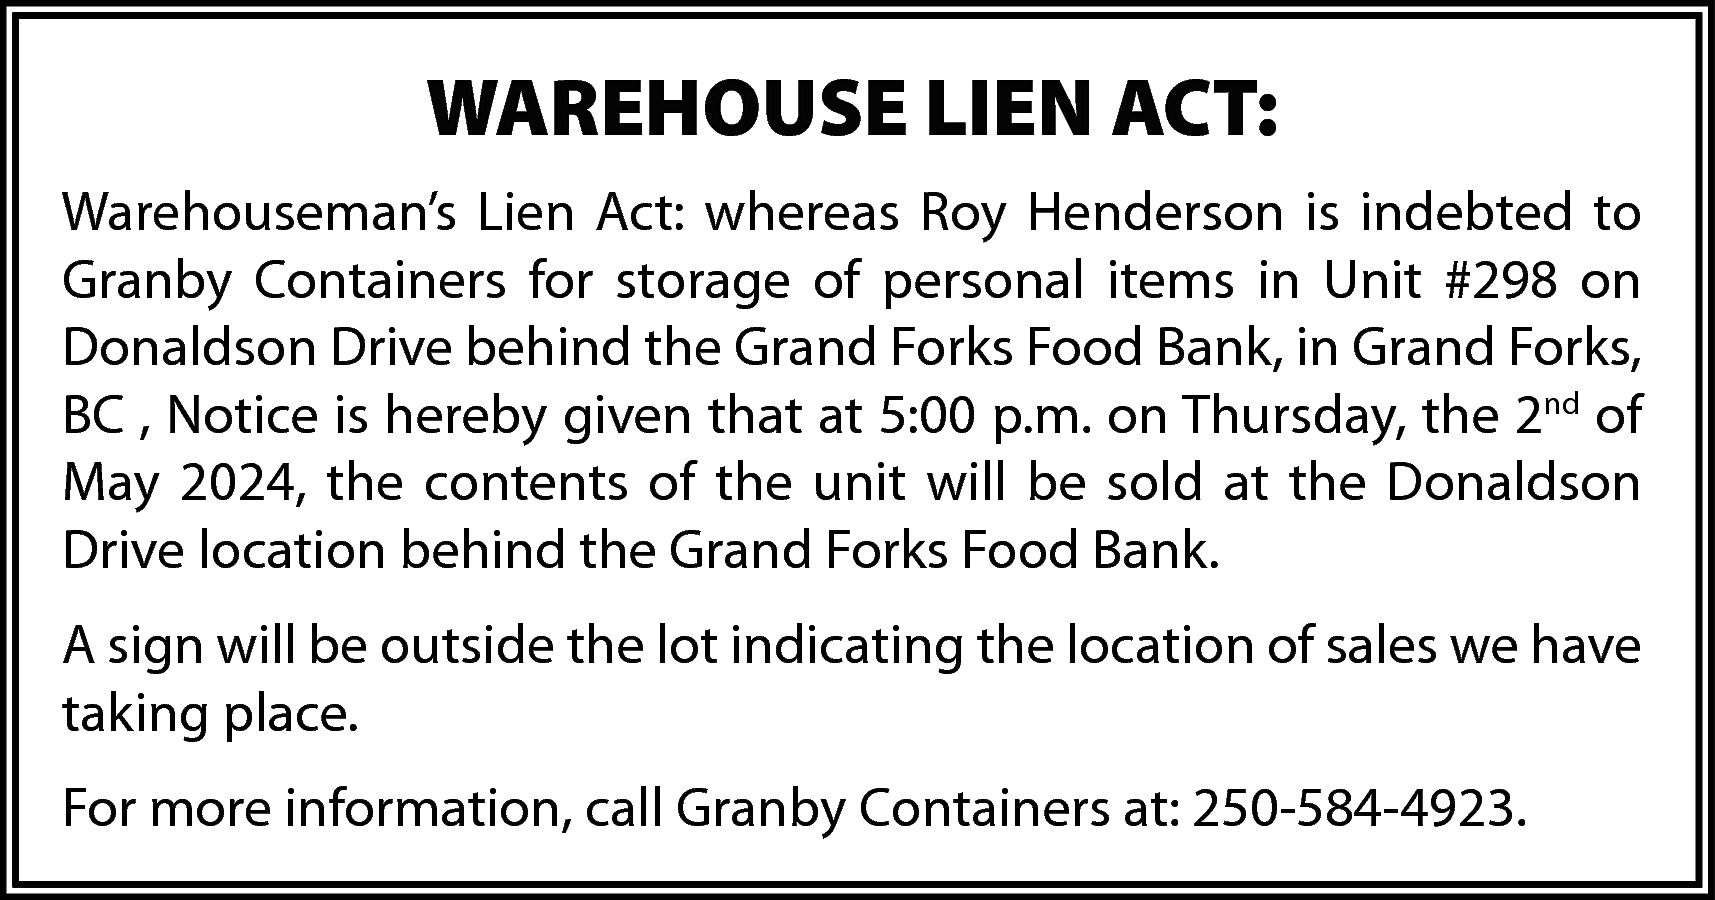 WAREHOUSE LIEN ACT: <br>Warehouseman’s Lien  WAREHOUSE LIEN ACT:  Warehouseman’s Lien Act: whereas Roy Henderson is indebted to  Granby Containers for storage of personal items in Unit #298 on  Donaldson Drive behind the Grand Forks Food Bank, in Grand Forks,  BC , Notice is hereby given that at 5:00 p.m. on Thursday, the 2nd of  May 2024, the contents of the unit will be sold at the Donaldson  Drive location behind the Grand Forks Food Bank.  A sign will be outside the lot indicating the location of sales we have  taking place.  For more information, call Granby Containers at: 250-584-4923.    